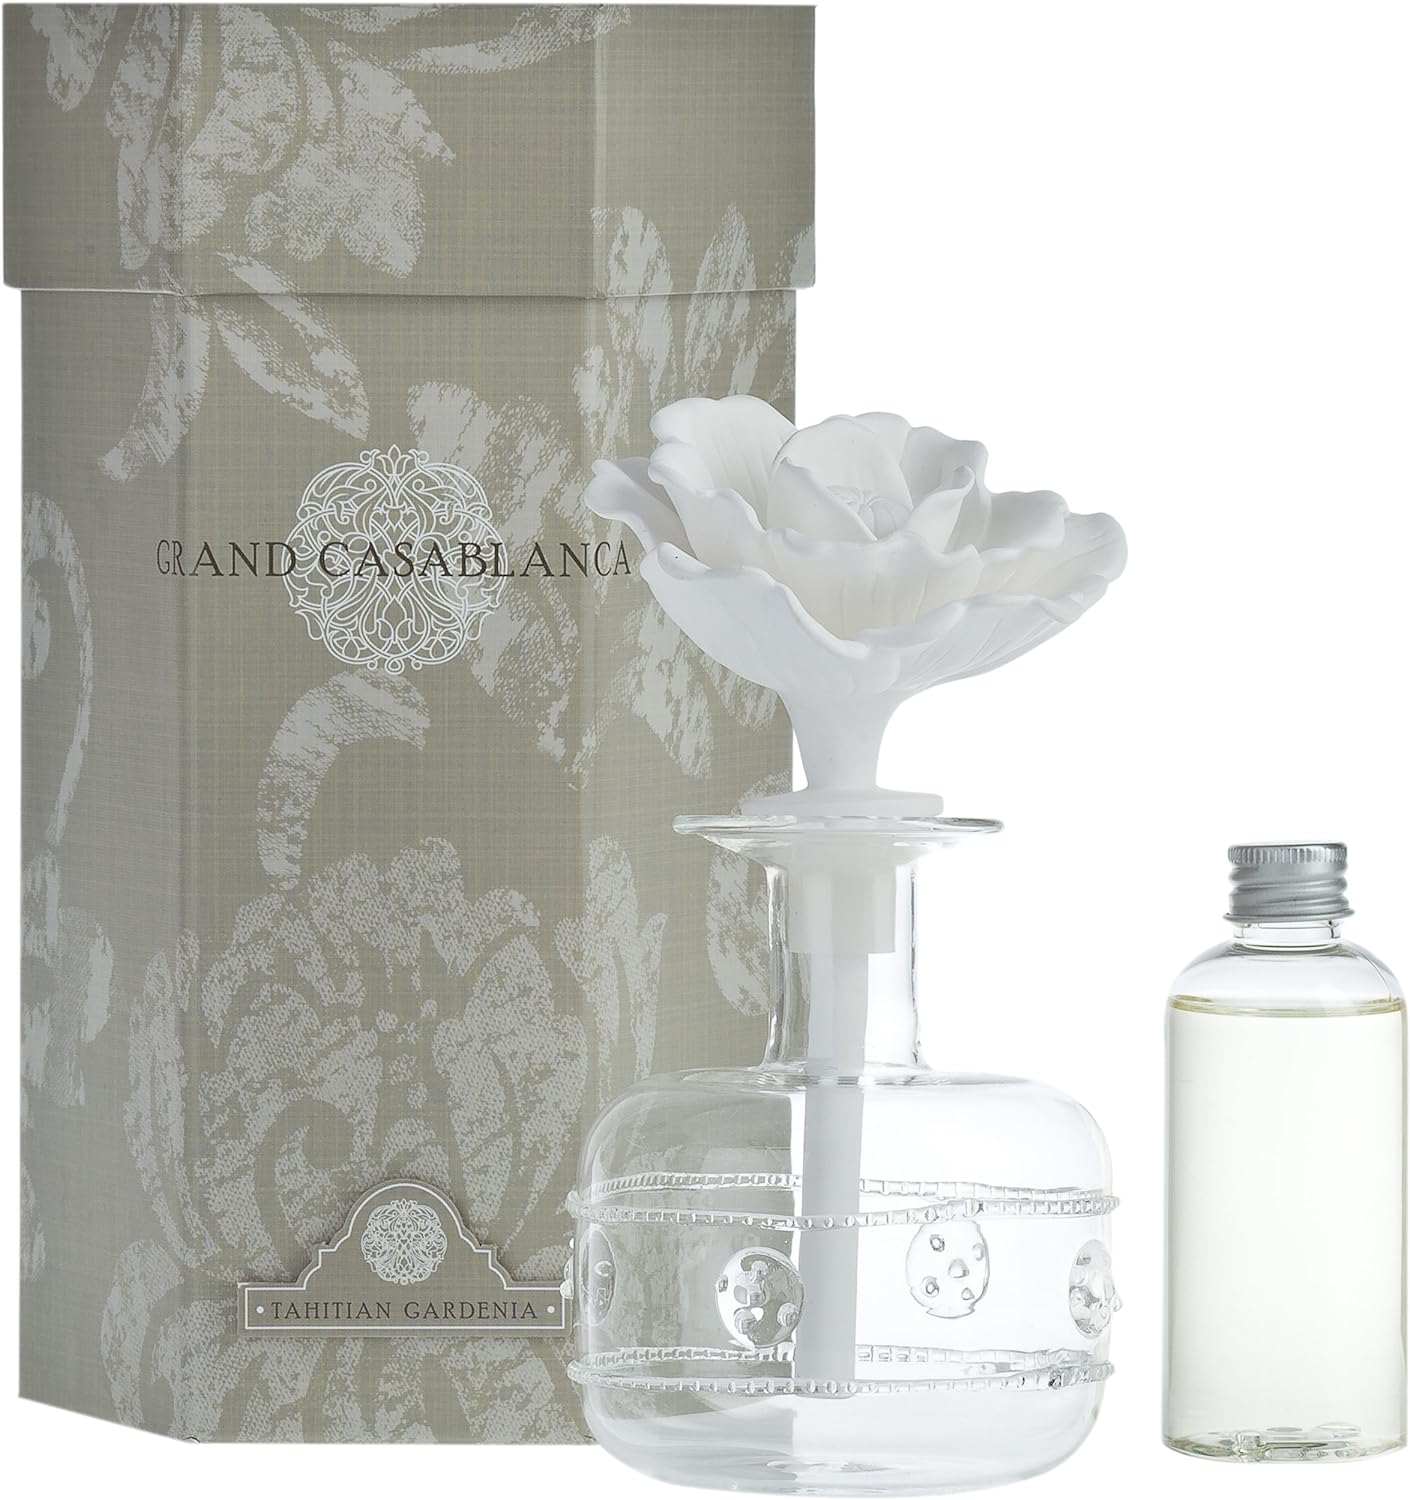 zodax grand casablanca porcelain diffuser tahitian gardenia scent best christmas gift for a lady under $100